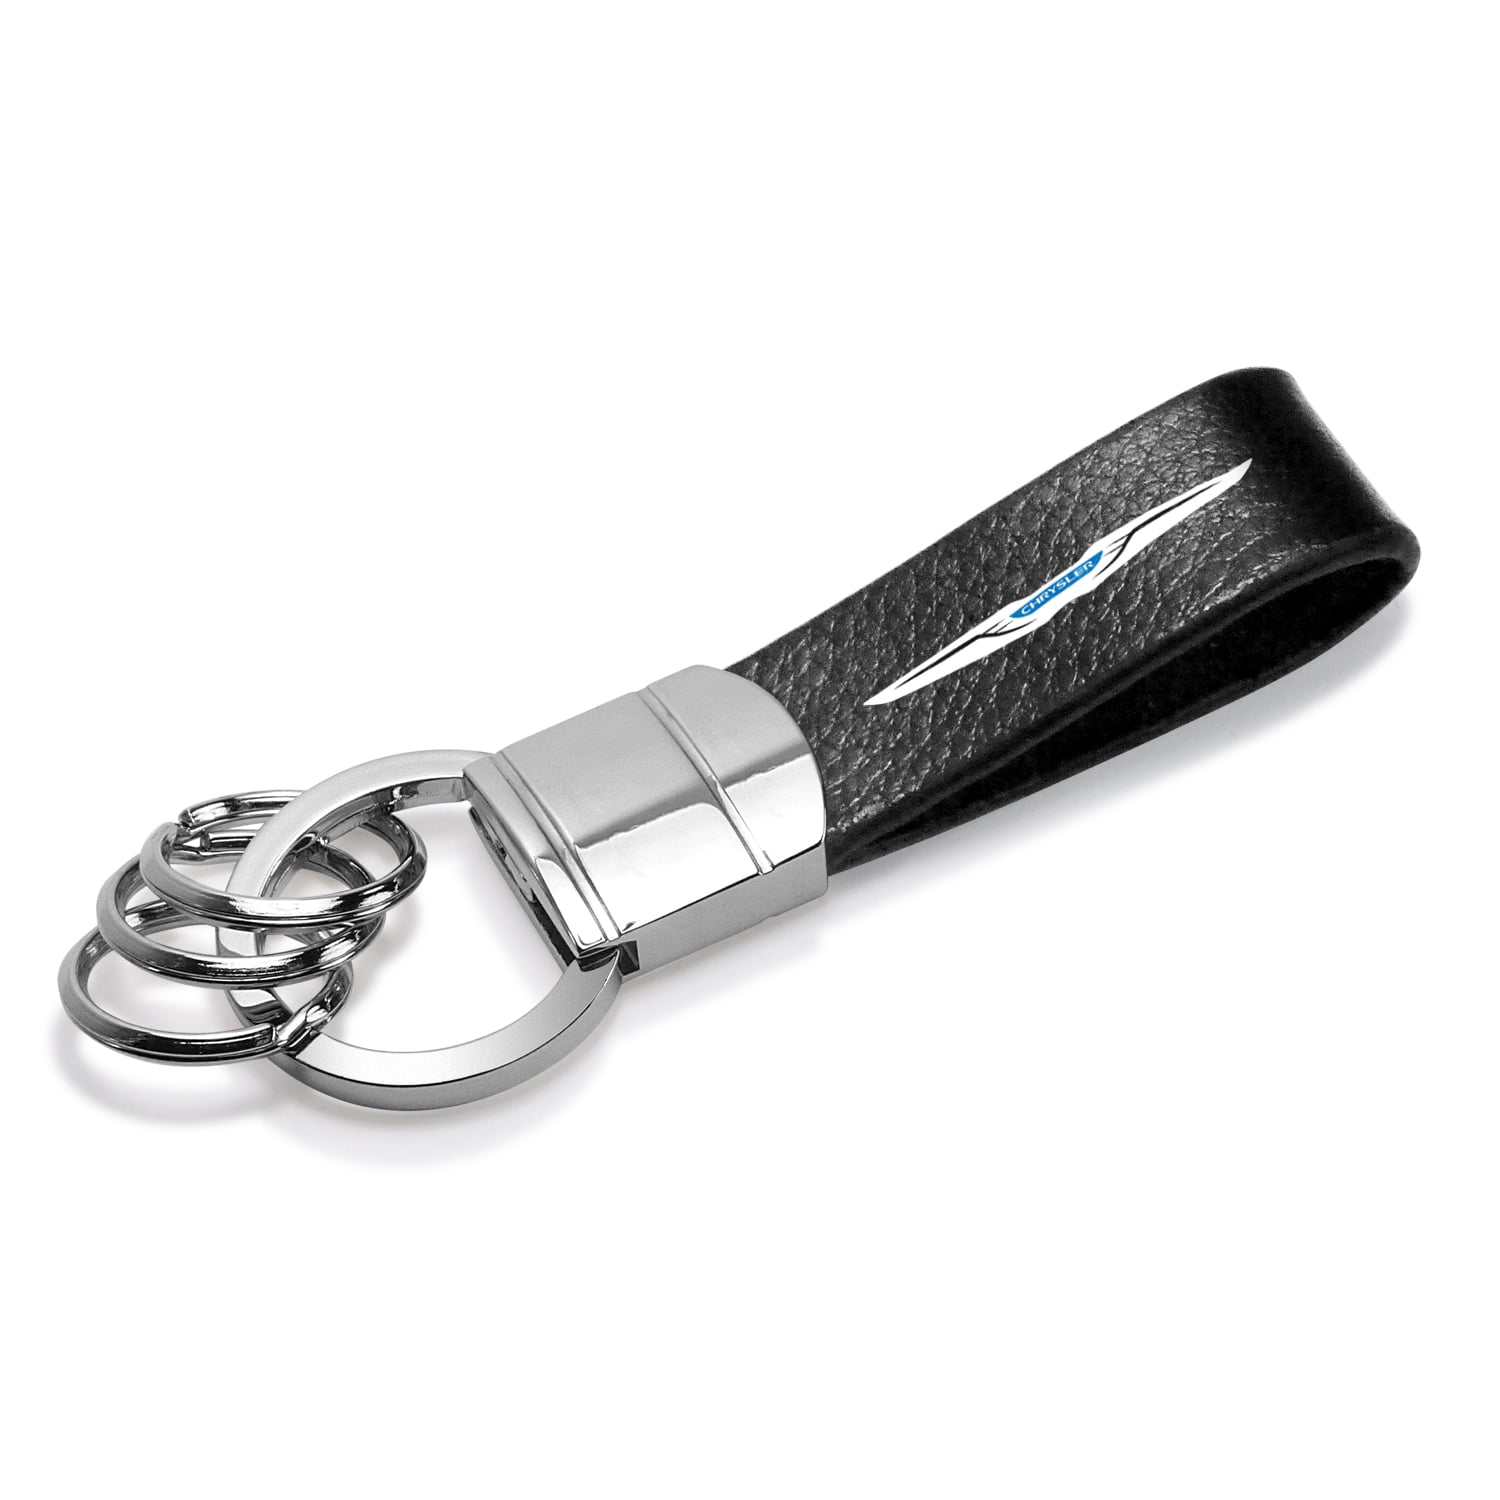 Dodge Challenger R/T Classic Genuine Black Leather Strap Loop Key Chain iPick Image for 